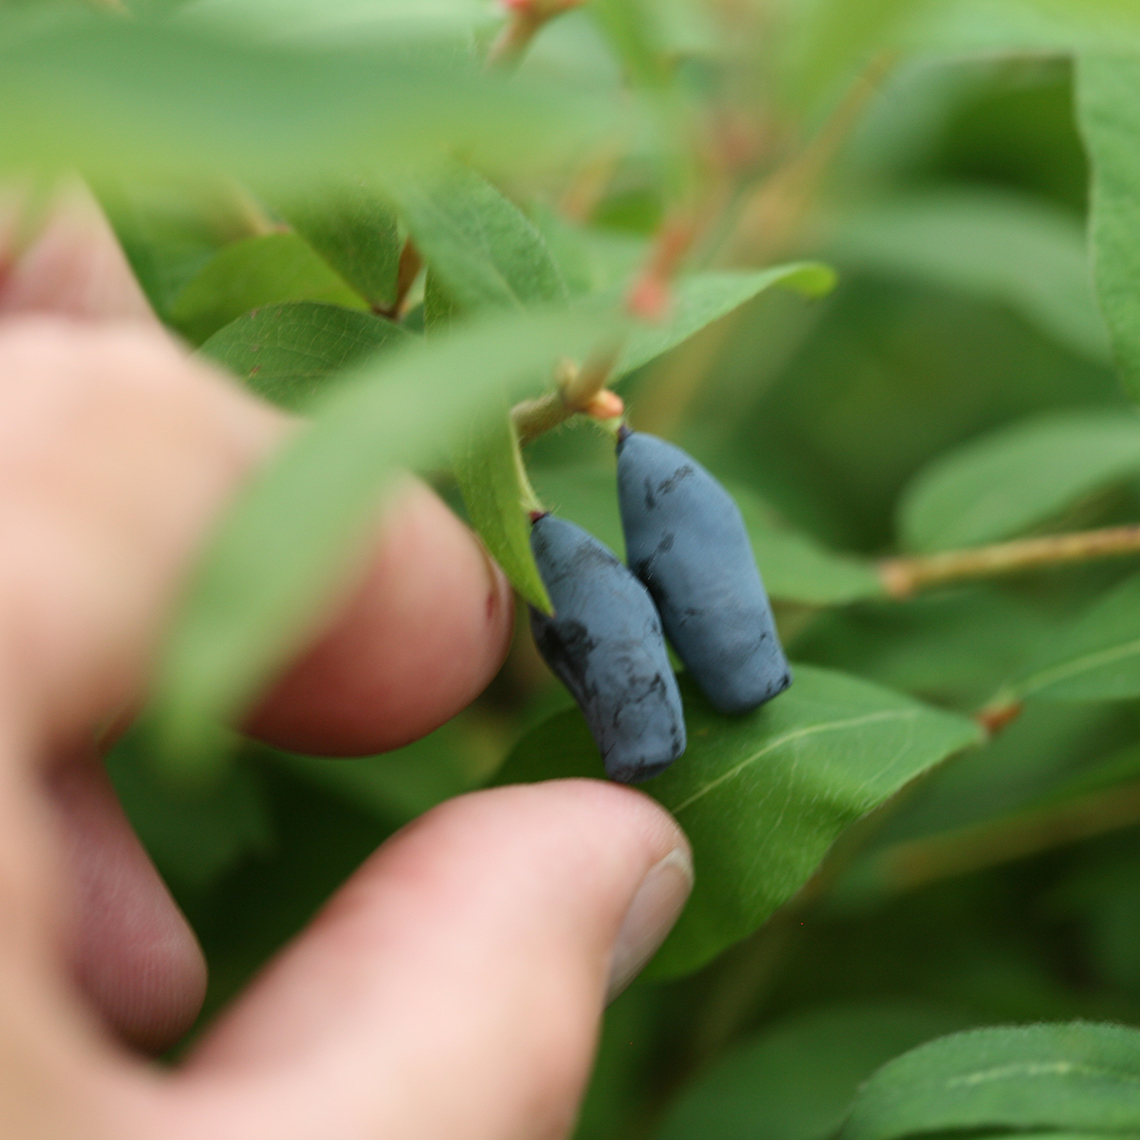 Sugar Mountain Blue Lonicera berries getting picked off the vine